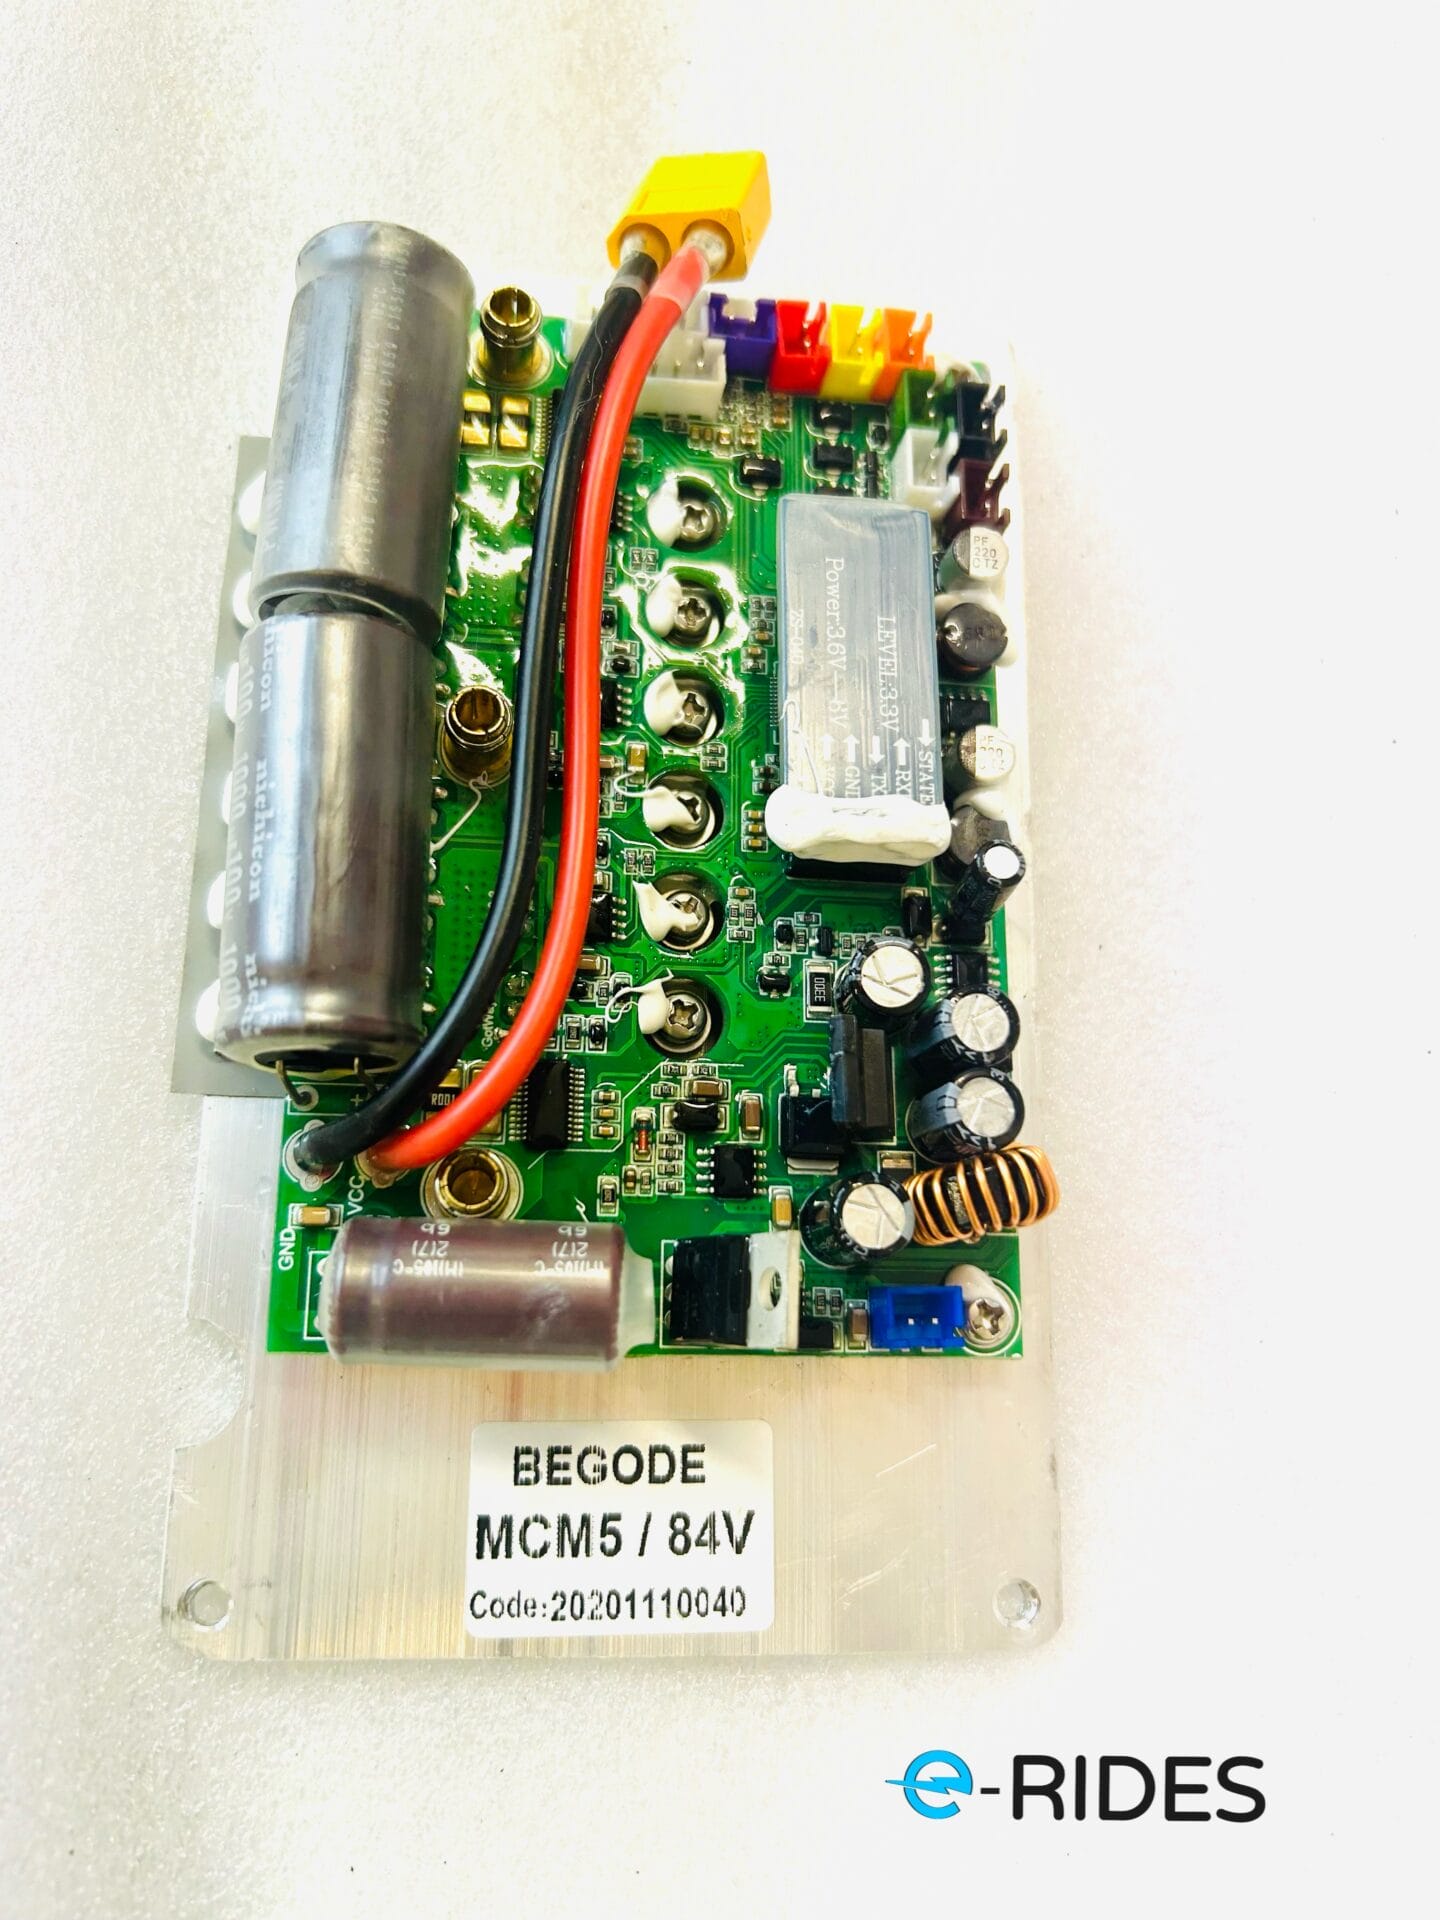 Begode (gotway) Mcm5 Electric Unicycle Green Control Board (mainboard) 84v